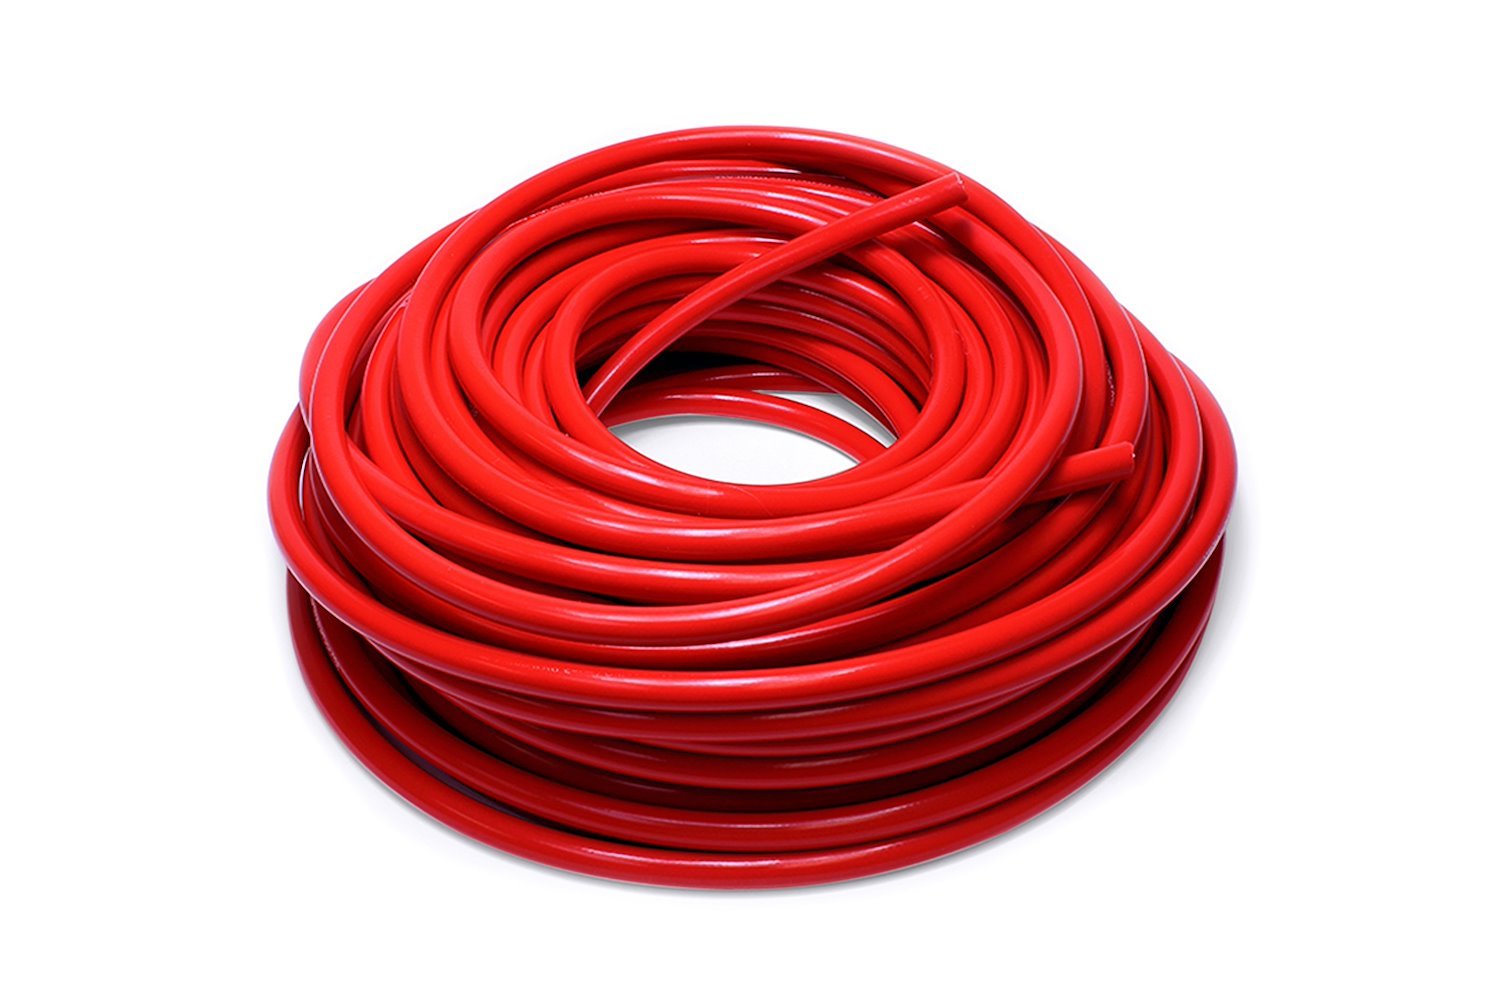 HTHH-038-REDx100 Silicone Heater Hose Tubing, High-Temp 1-Ply Reinforced, 3/8 in. ID, 100 ft. Roll, Red